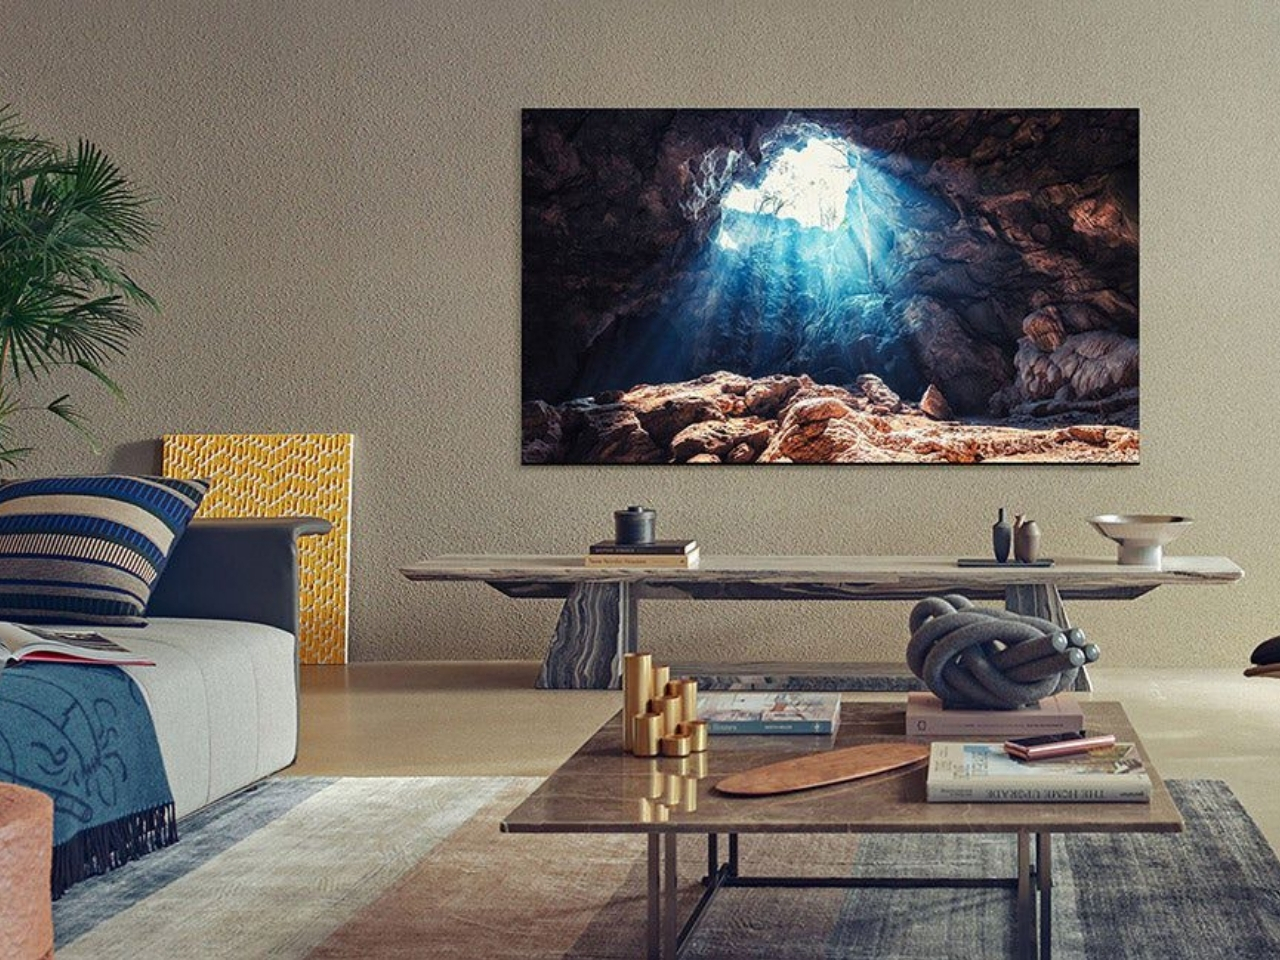 A Samsung 8K TV in a living room.